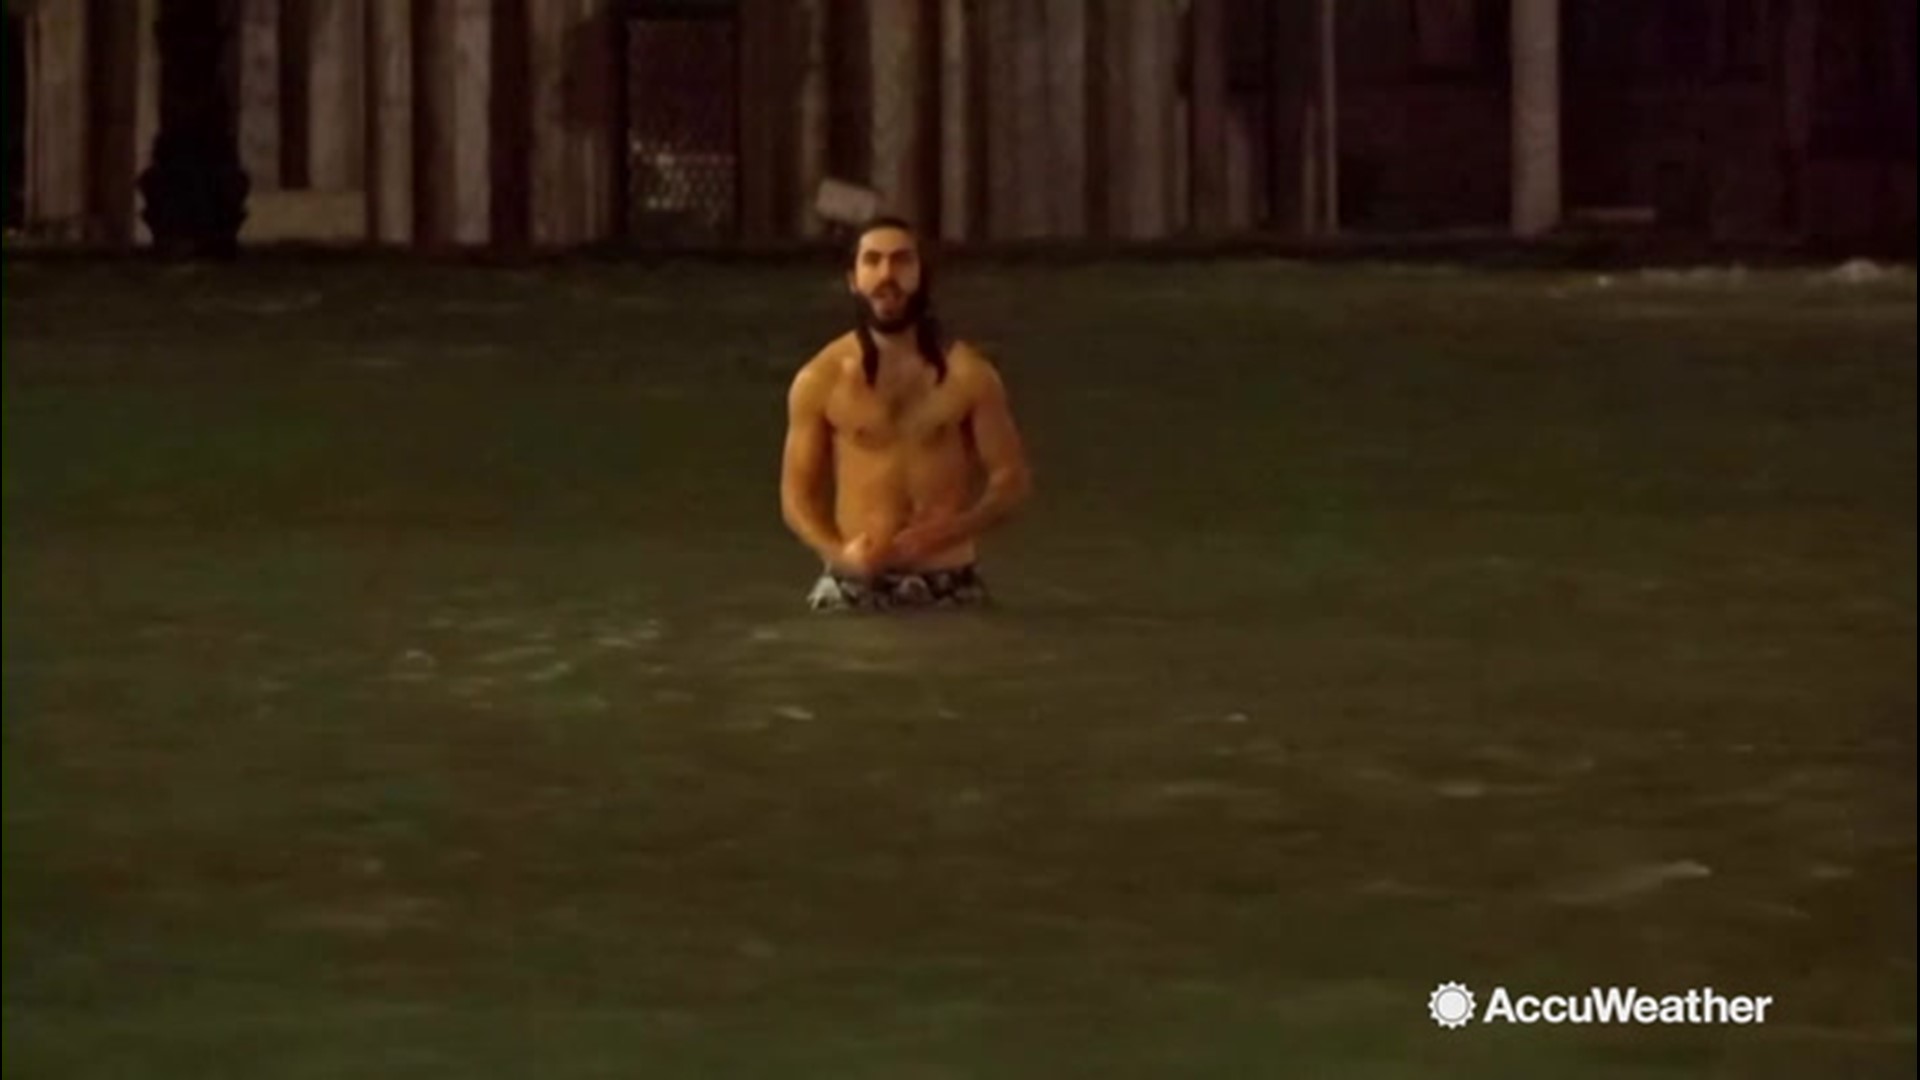 As Venice, Italy, flooded on Nov. 12, due to the highest tide the residents had seen in more than 50 years, one man decided to enjoy the high waters by going for a swim in the famed St. Mark's Square.